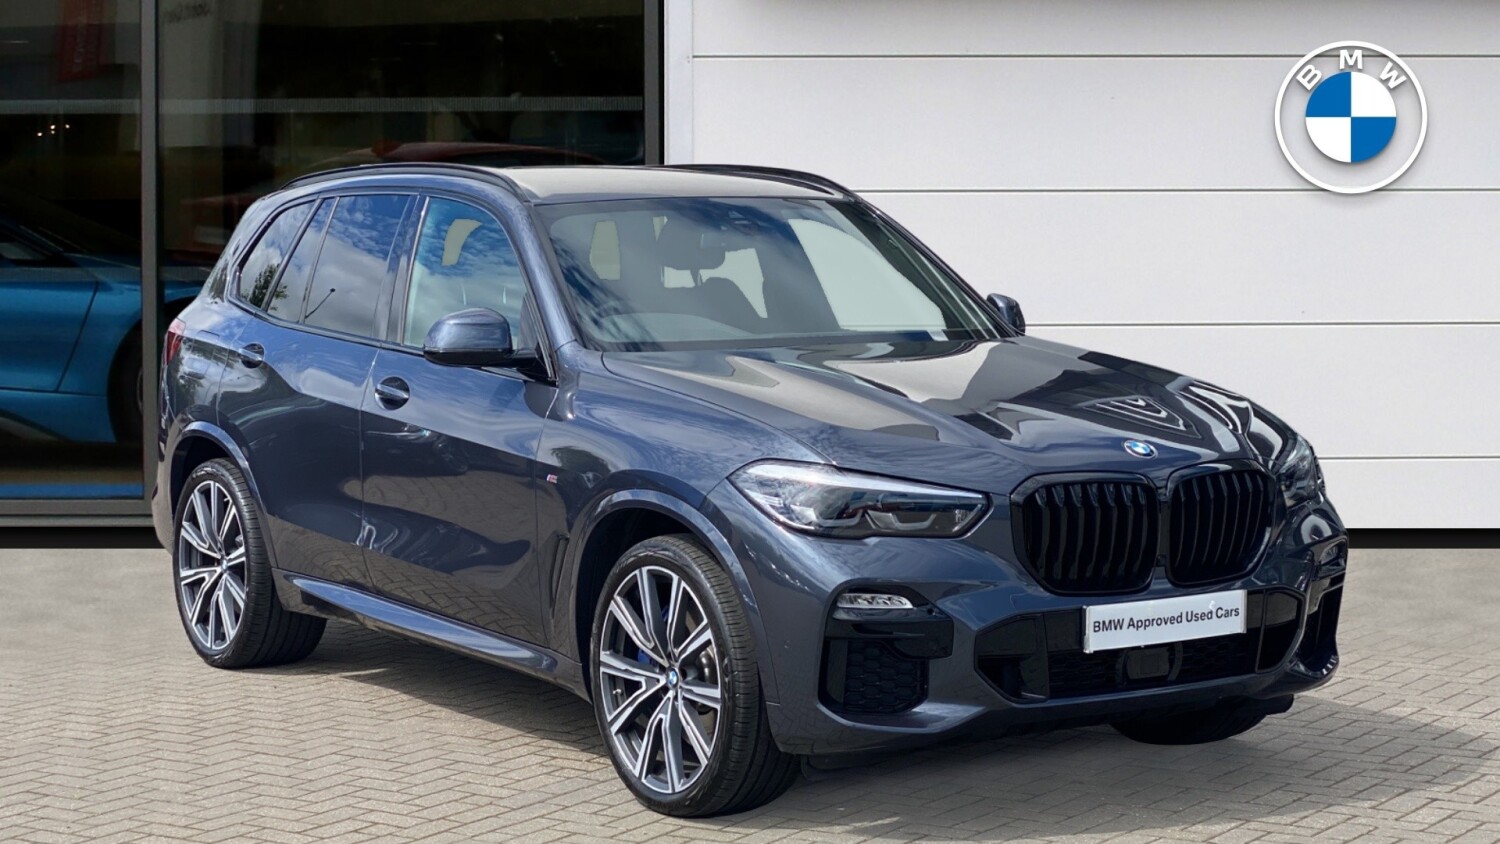 Used BMW X5 xDrive45e M Sport 5dr Auto [Tech Pack] Estate for Sale